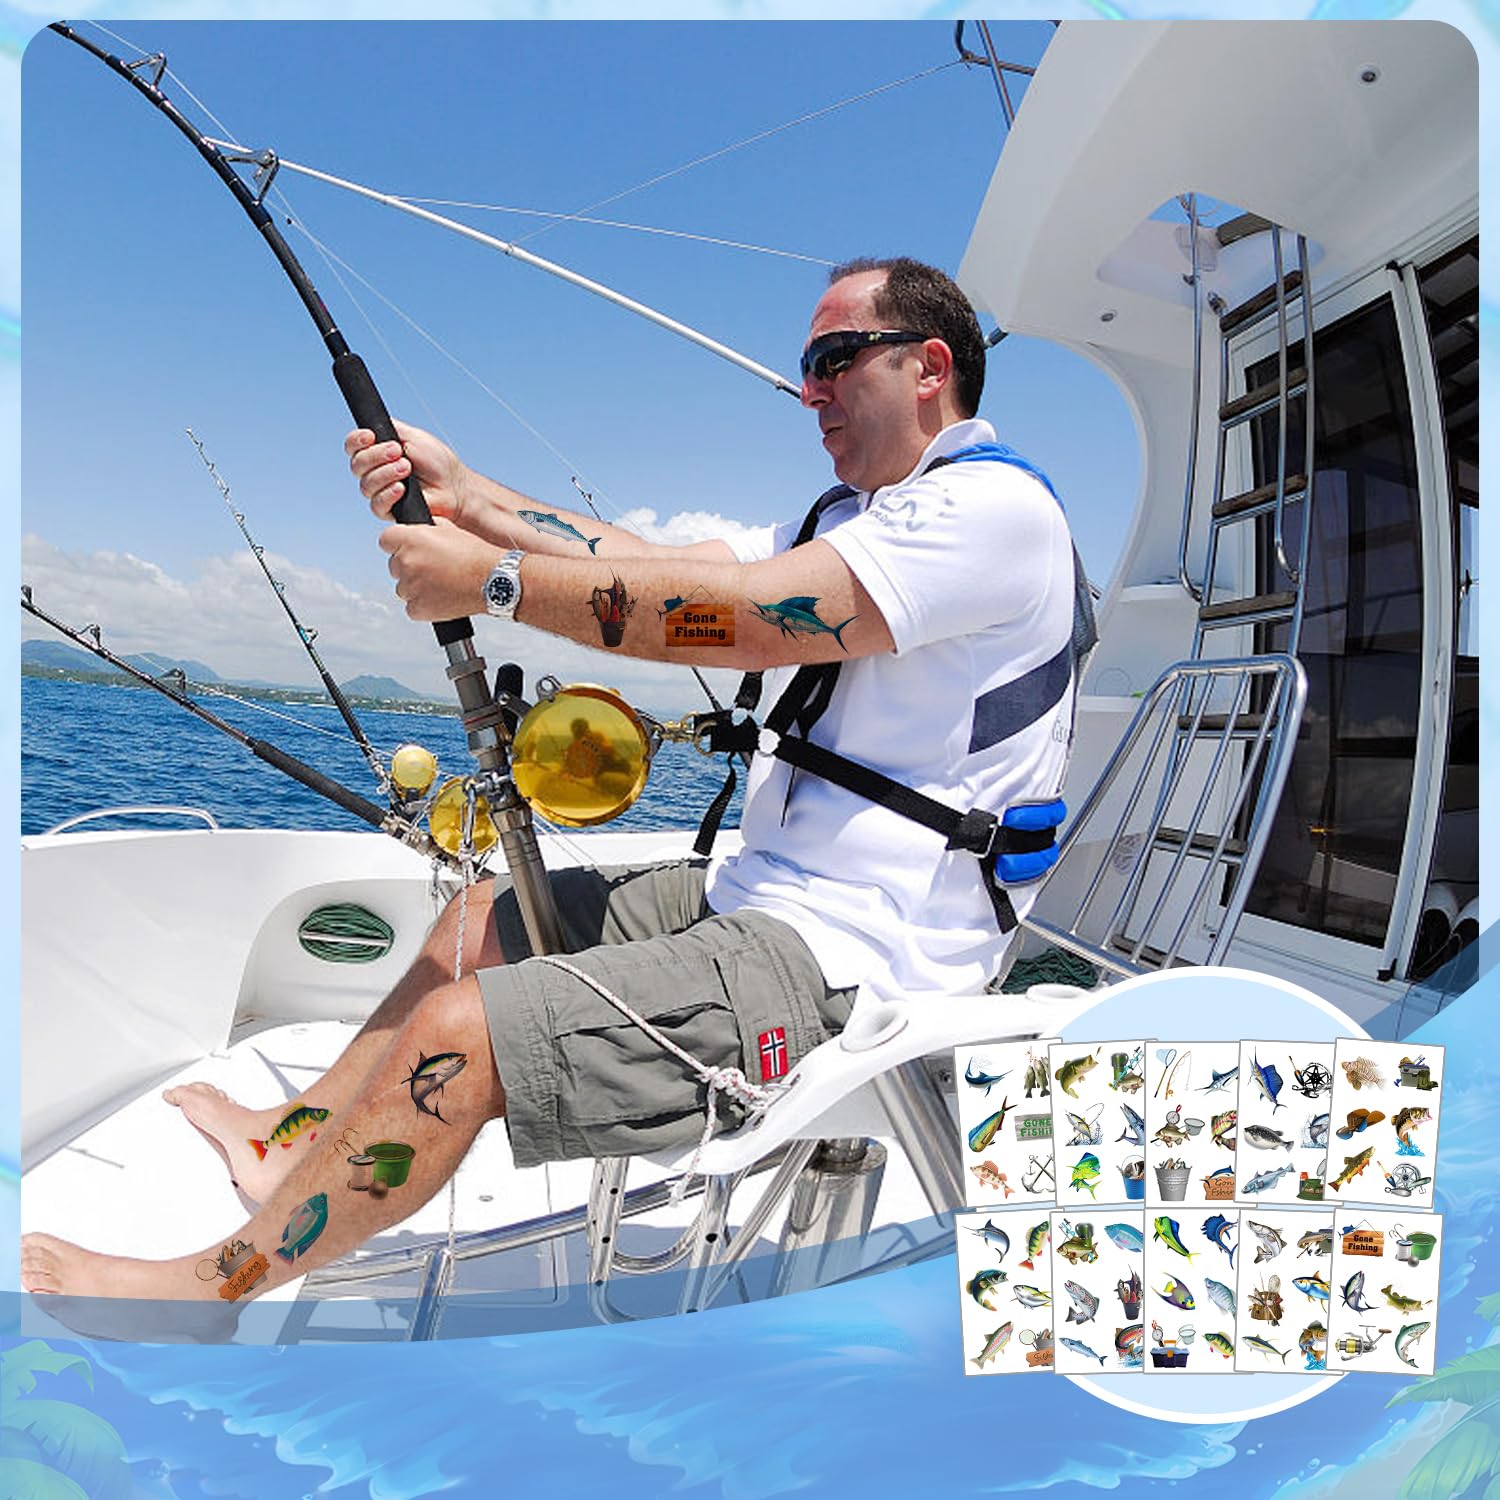 20 Sheets(120PCS) Gone Fishing Fish Temporary Tattoos Gone Fishing Party Favor for Birthday Party Supplies Fishing Party Decorations, Fathers Day, Retirement, Baby Shower for Kids Boys Adults